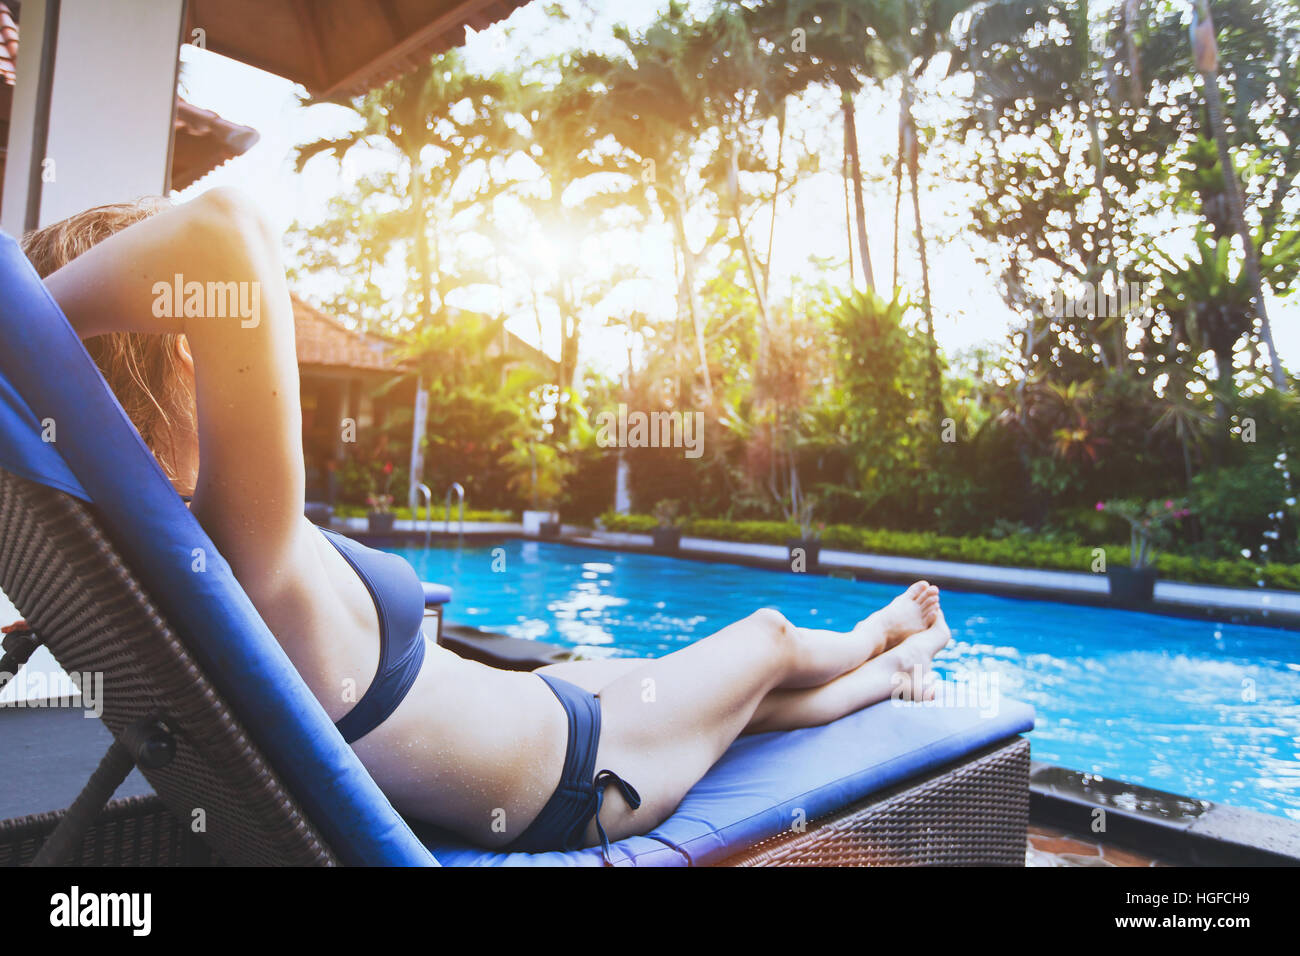 people relaxing in luxury tropical resort hotel near swimming pool Stock Photo